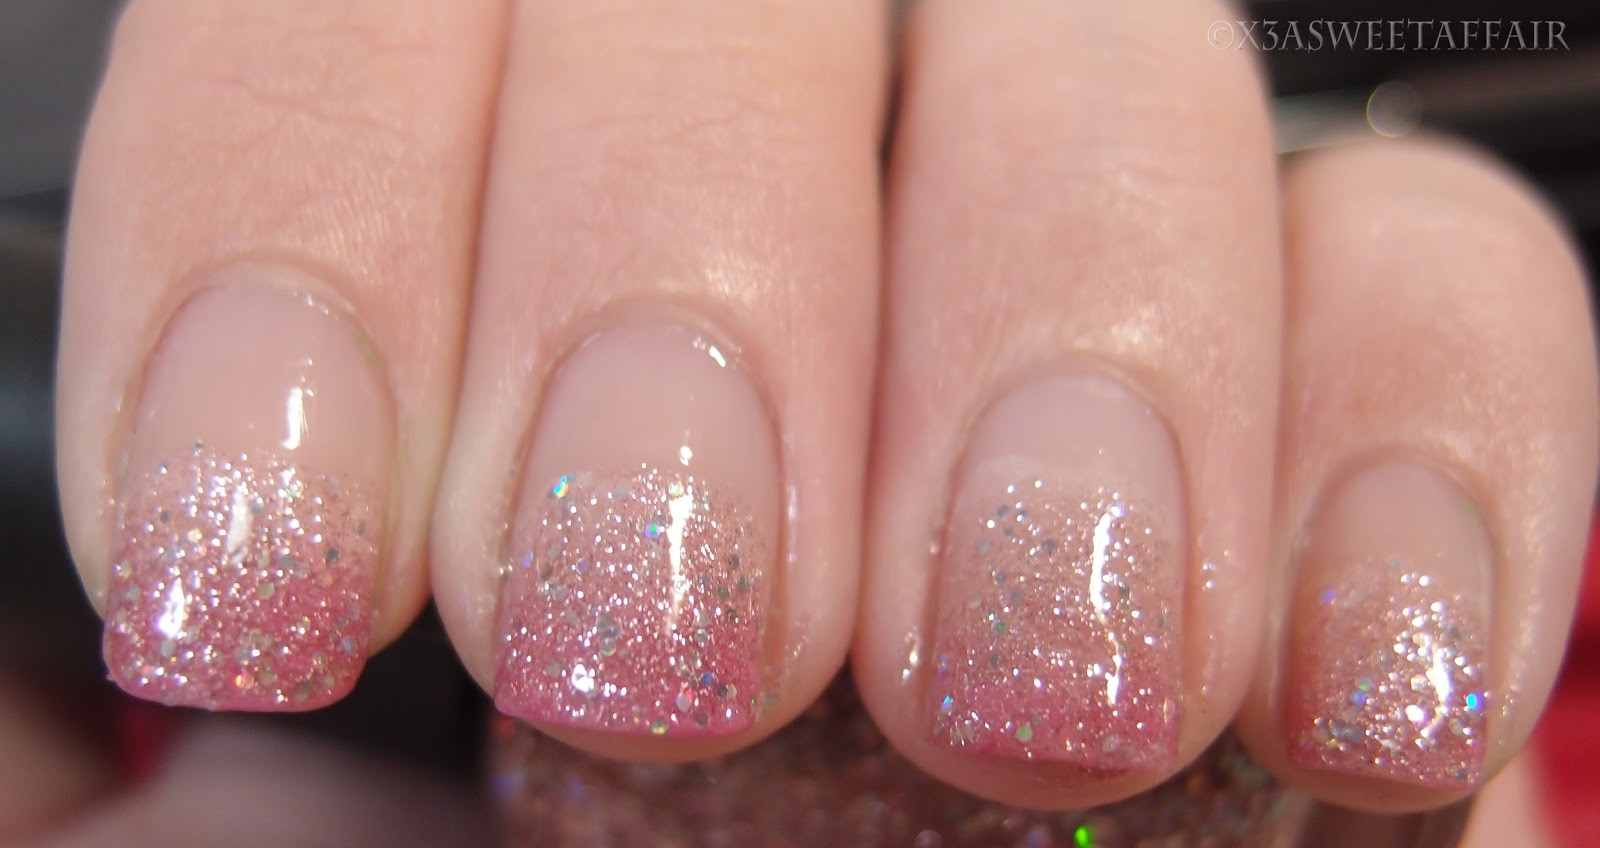 Pink Glitter Ombre Nails
 x3ASweetAffair Naturally Nails Pink ombre glitter